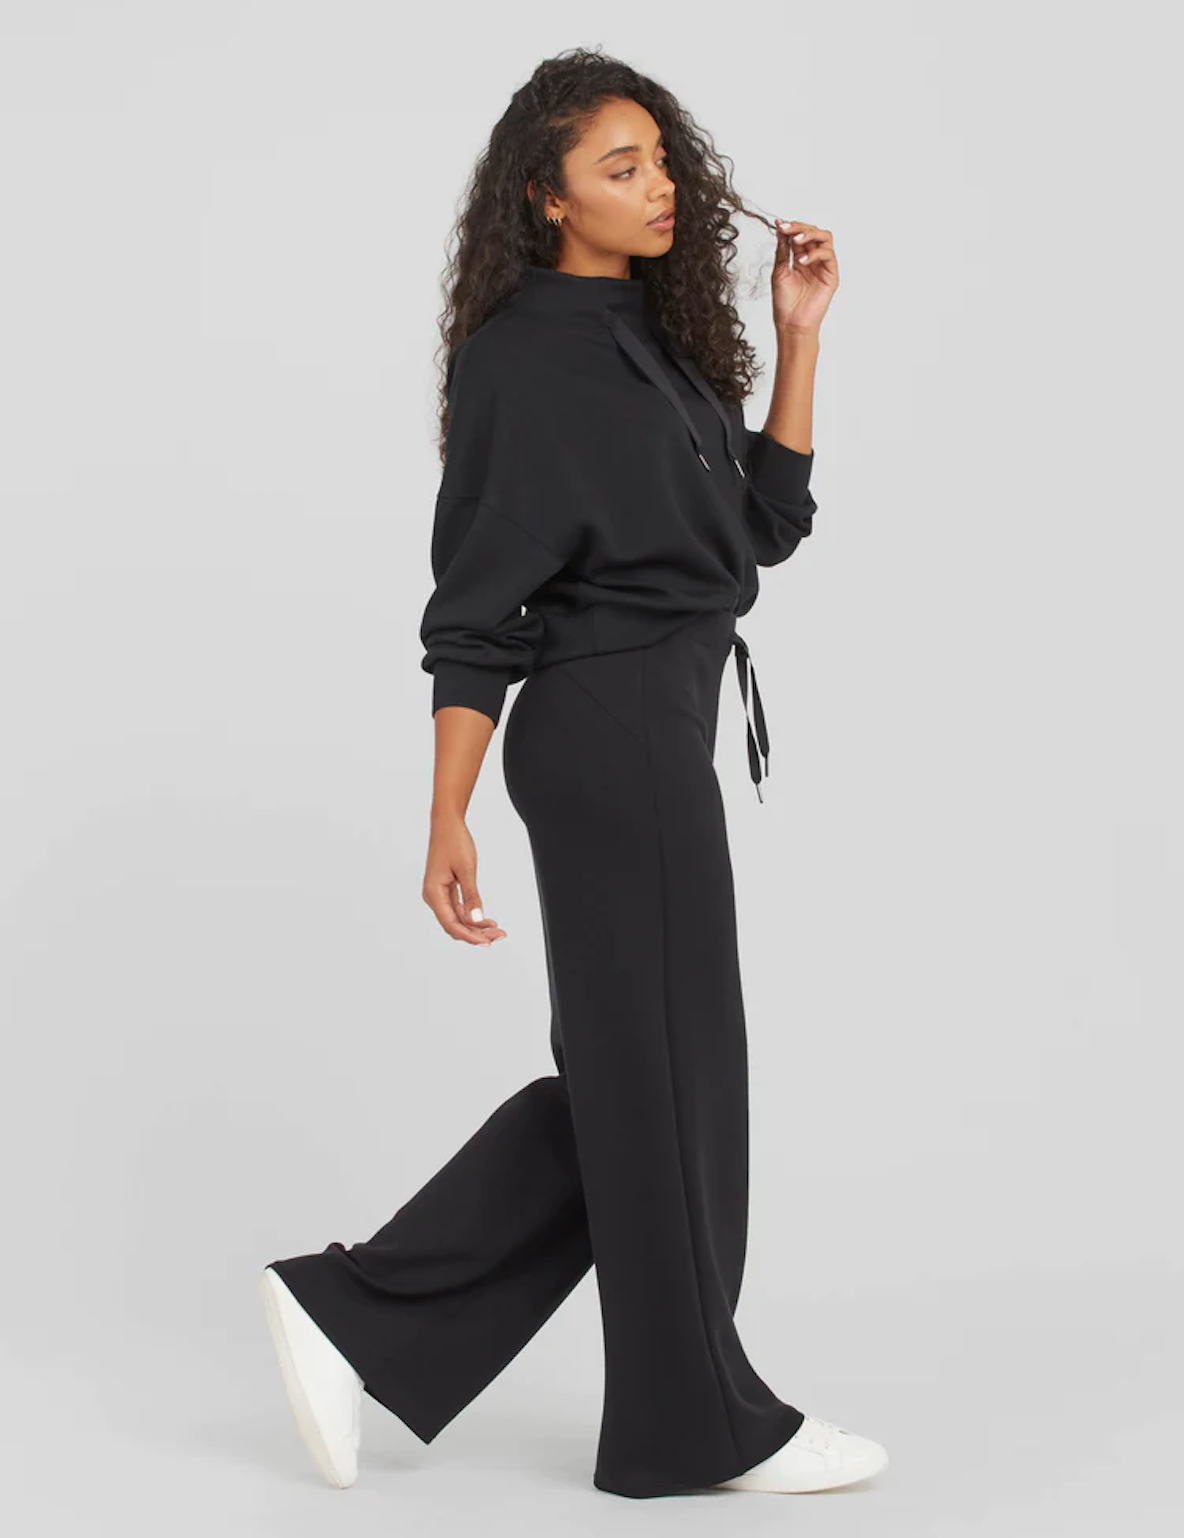 Jeans & Trousers | Very High Waisted Black Trousers | Freeup